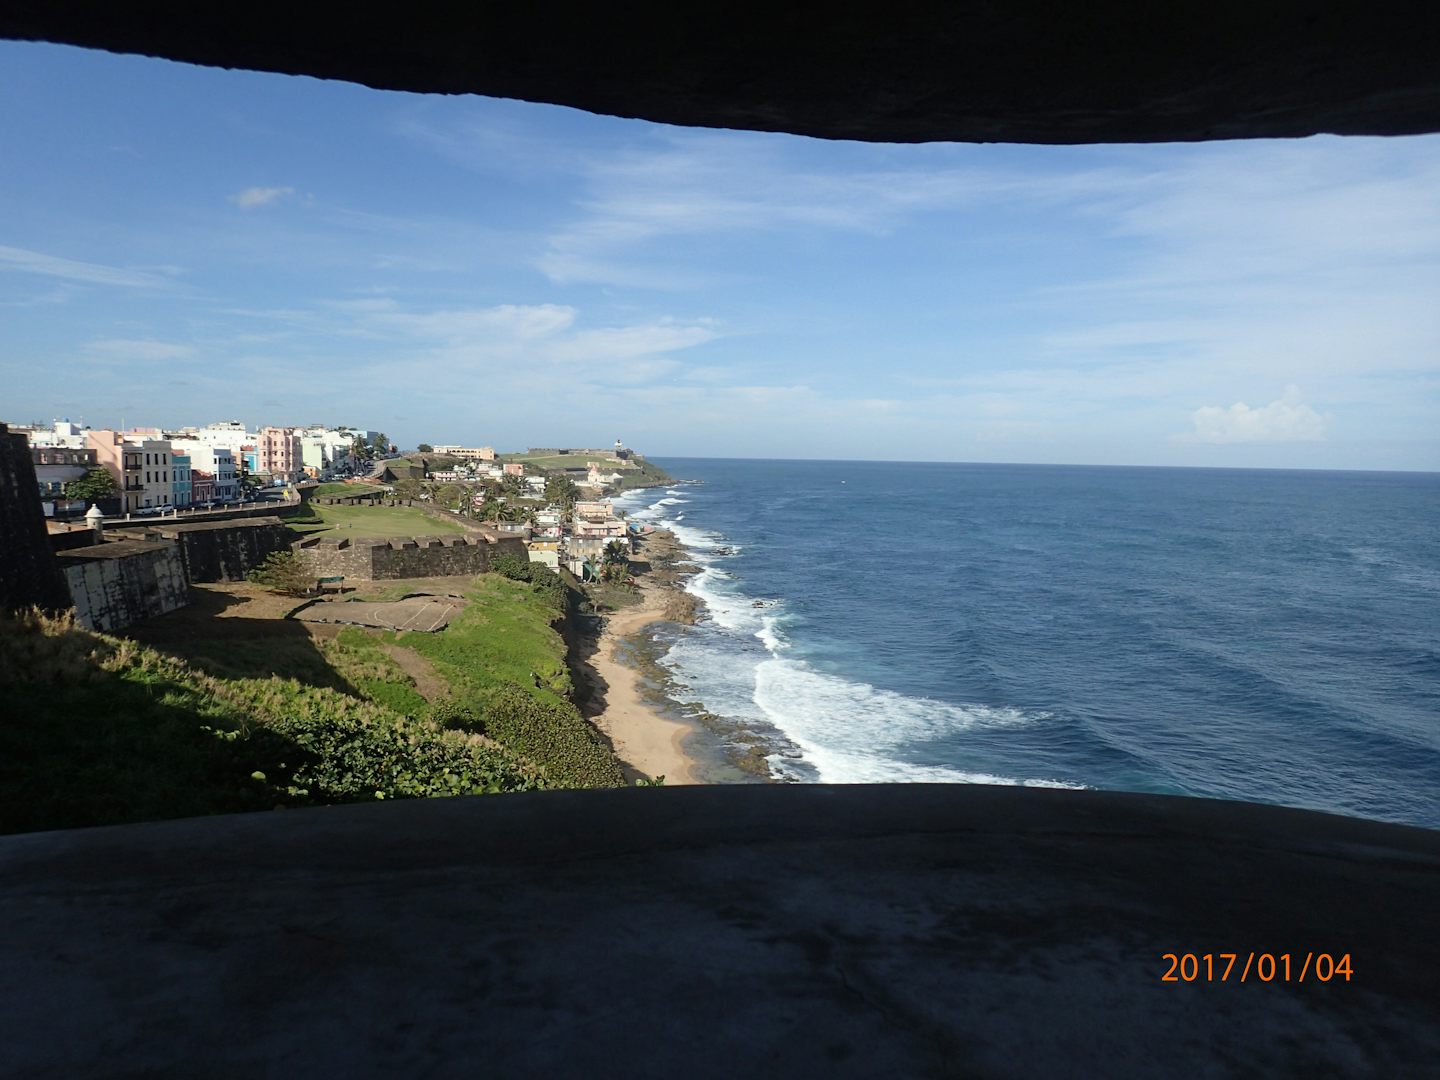 View from San Cristobal